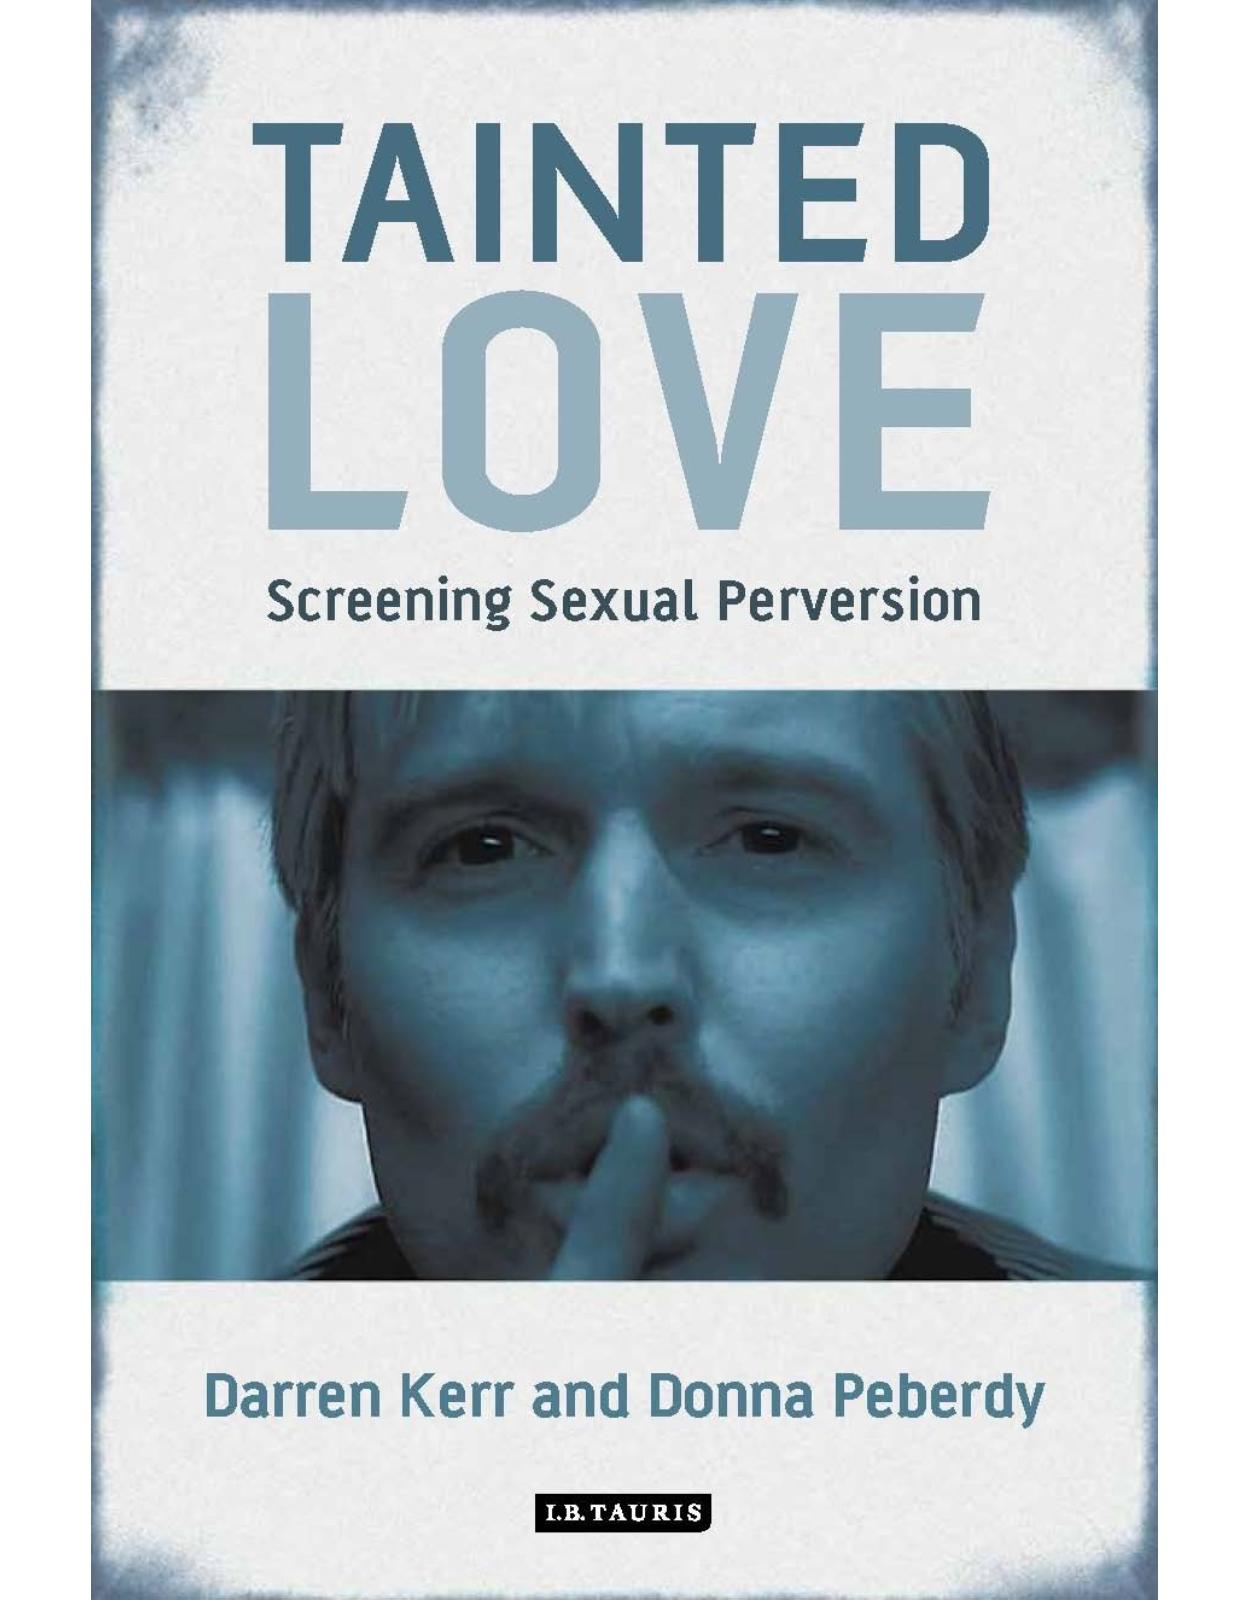 Tainted Love: Screening Sexual Perversion (International Library of the Moving Image) 